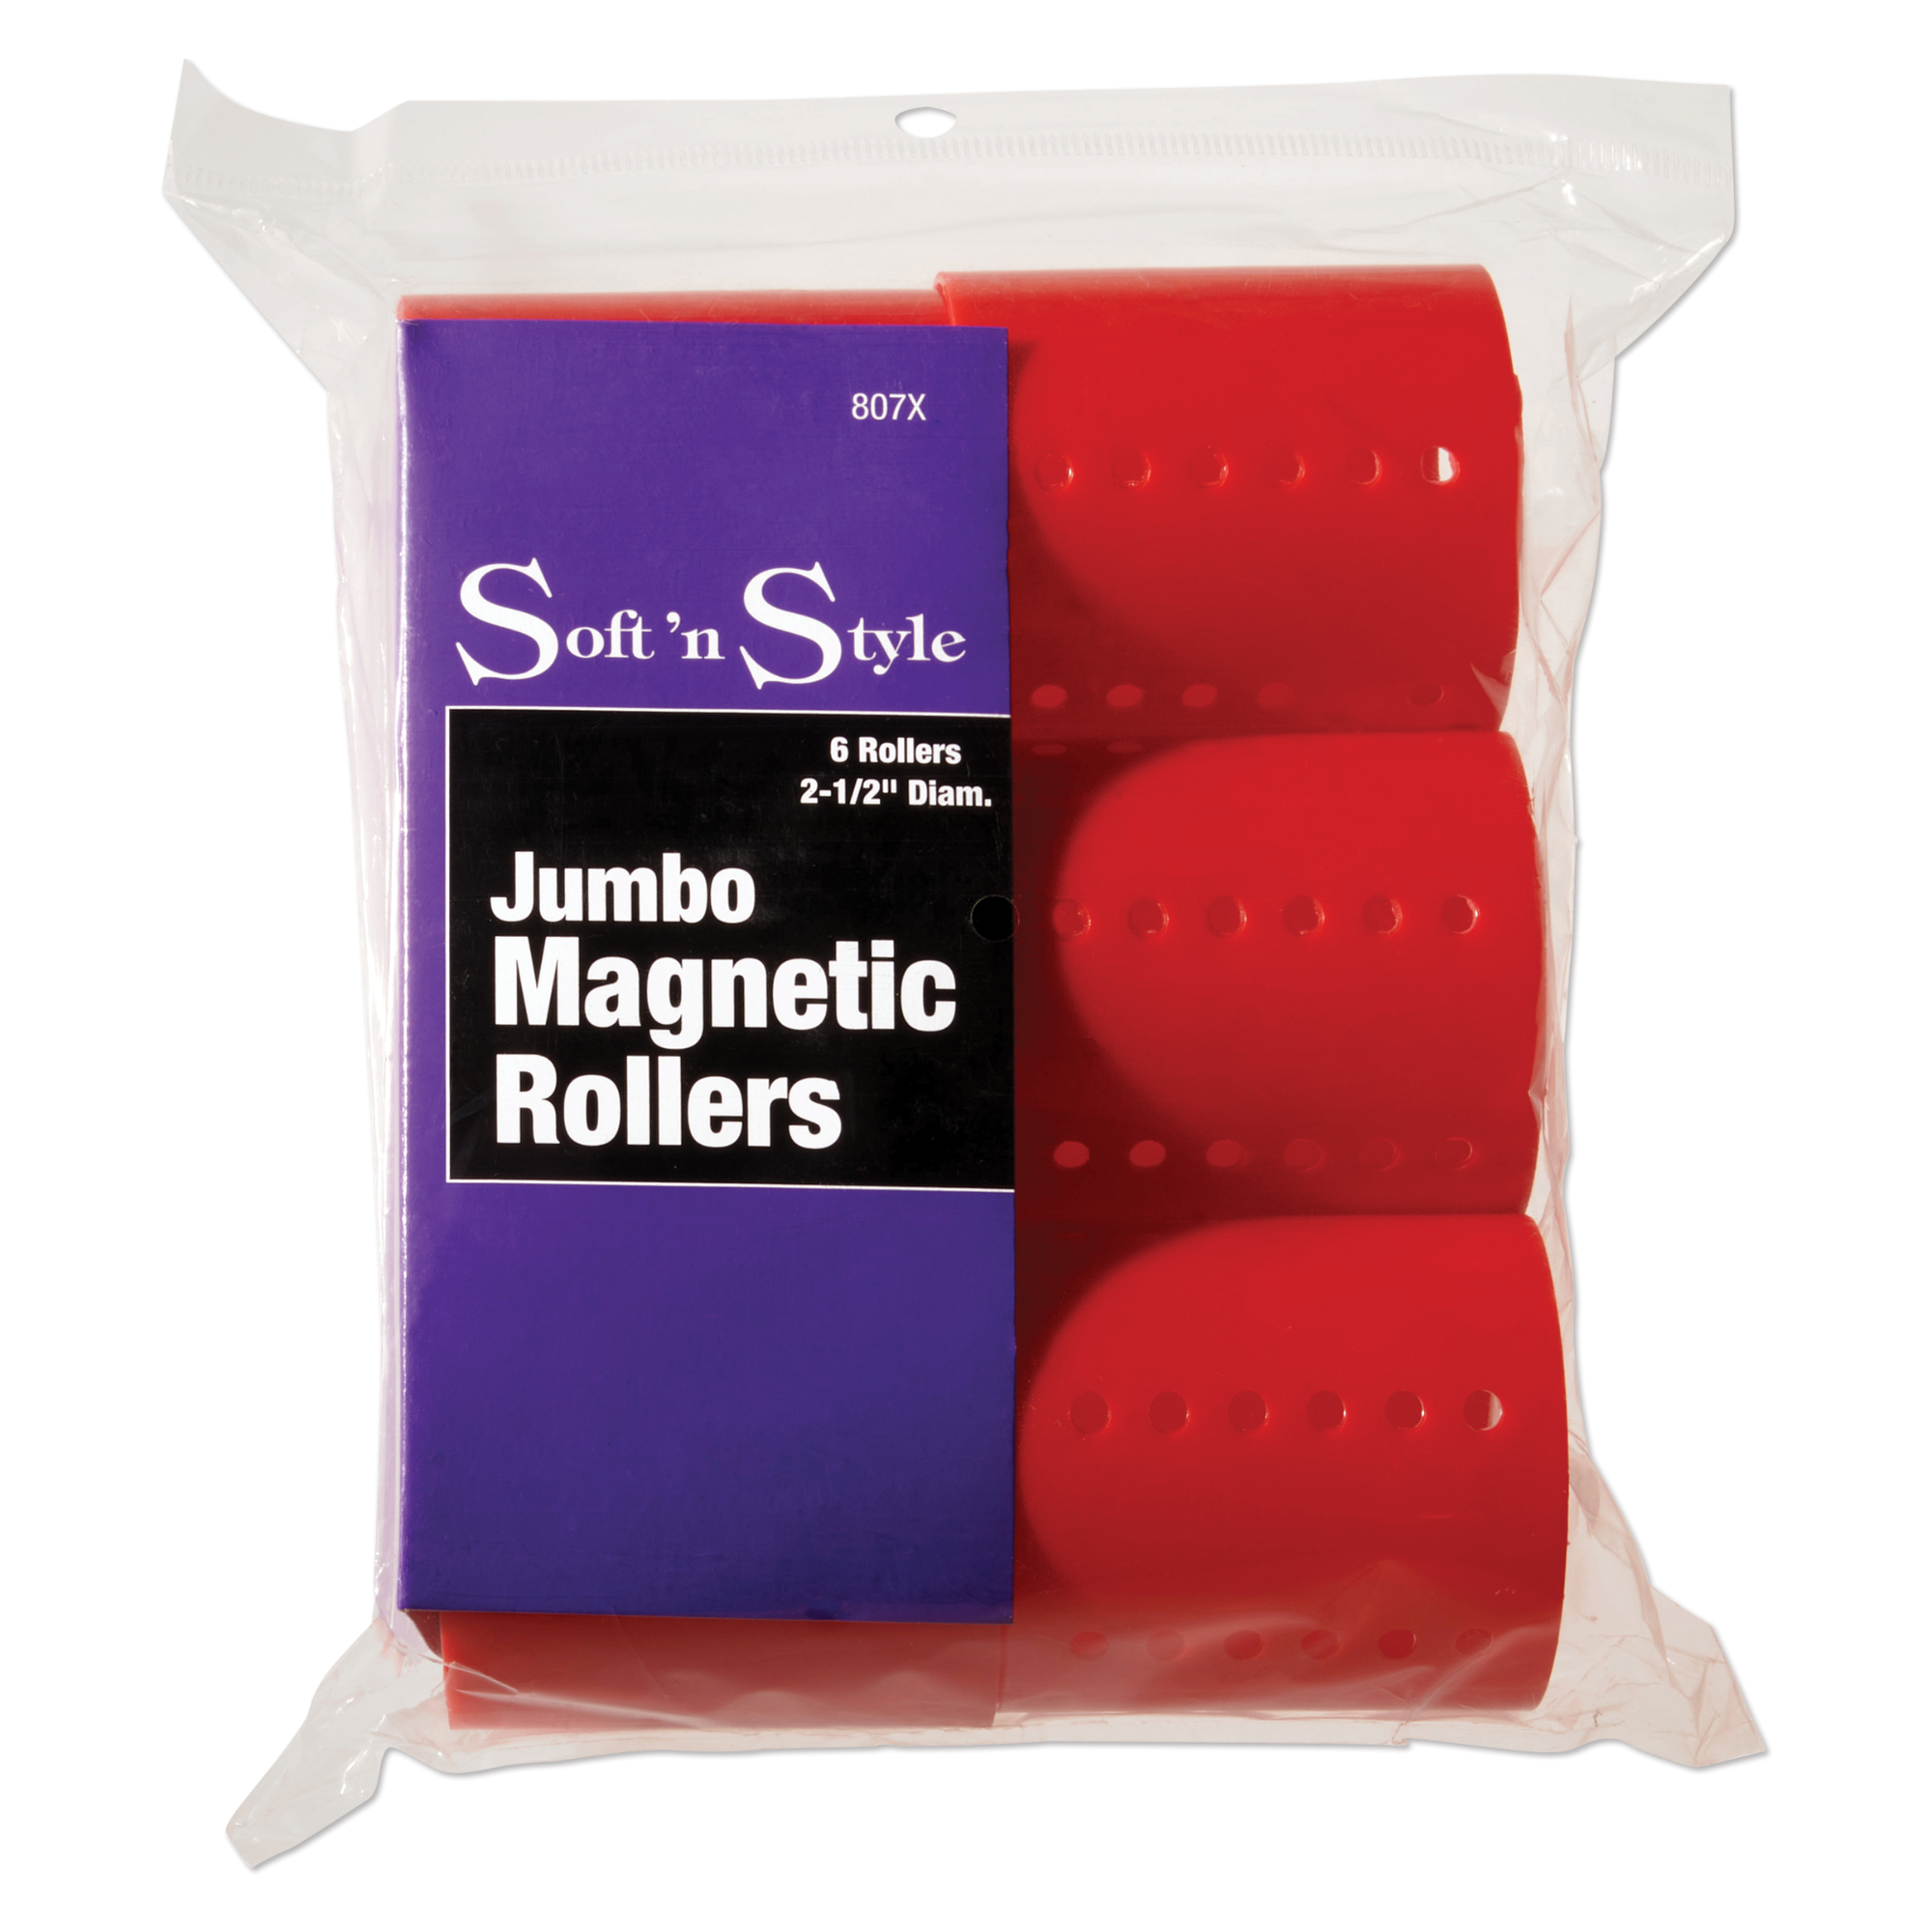 Jumbo Magnetic Rollers - Red, 2-1/2"